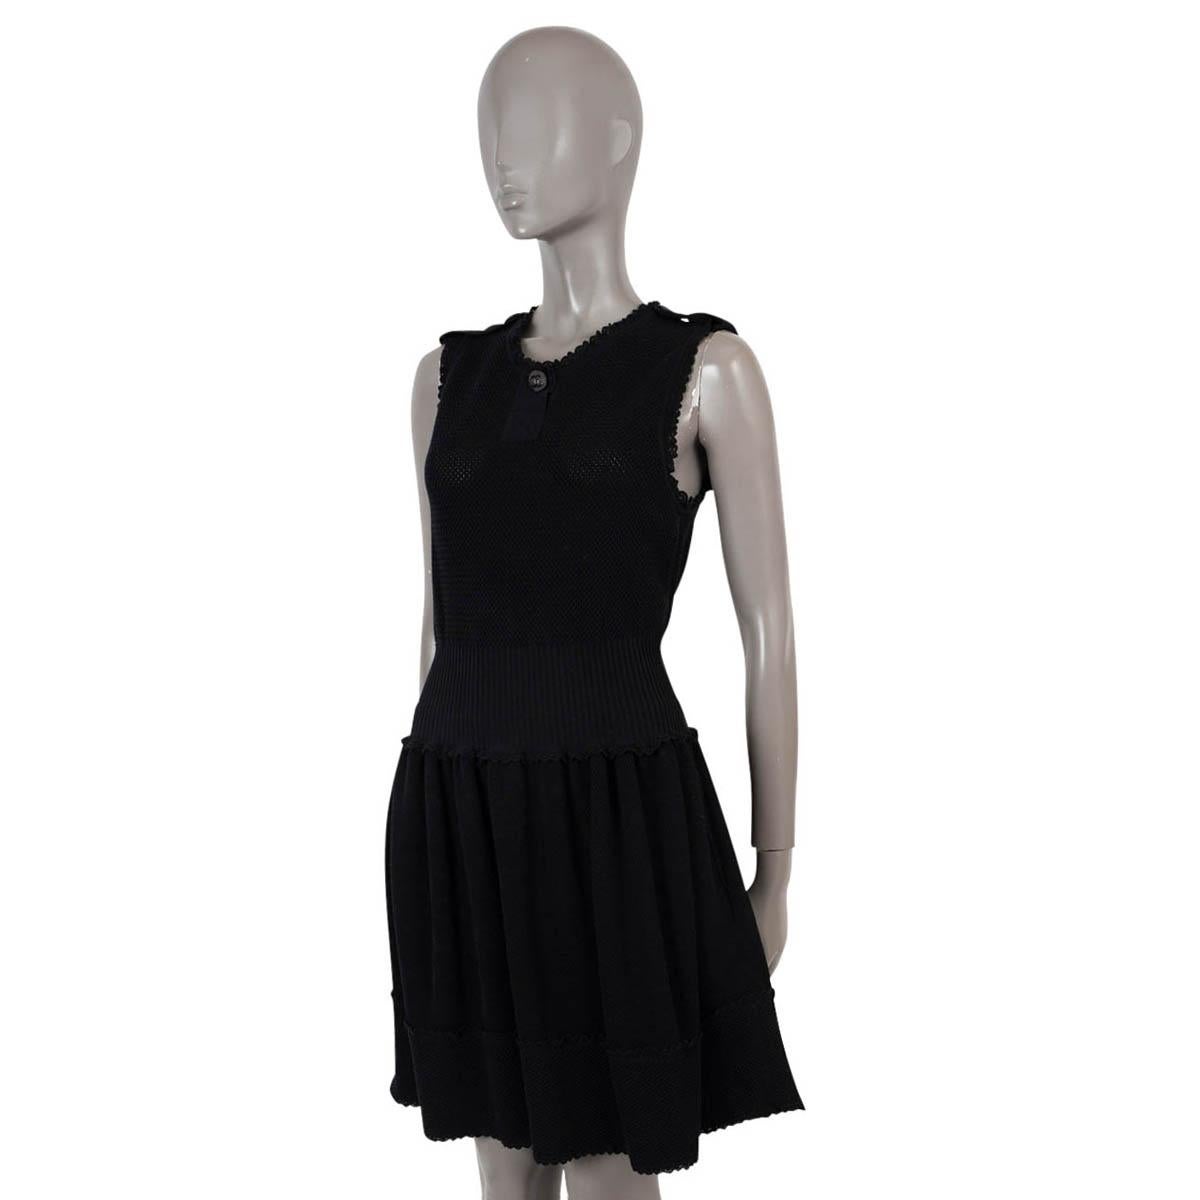 100% authentic Chanel sleeveless knit dress in black cotton (100%). Features scalloped trims, buttoned epaulettes, a silver-tone CC button at the neck, an open knit top, a rib-knit waist and pleated skirt. Has been worn and is in excellent